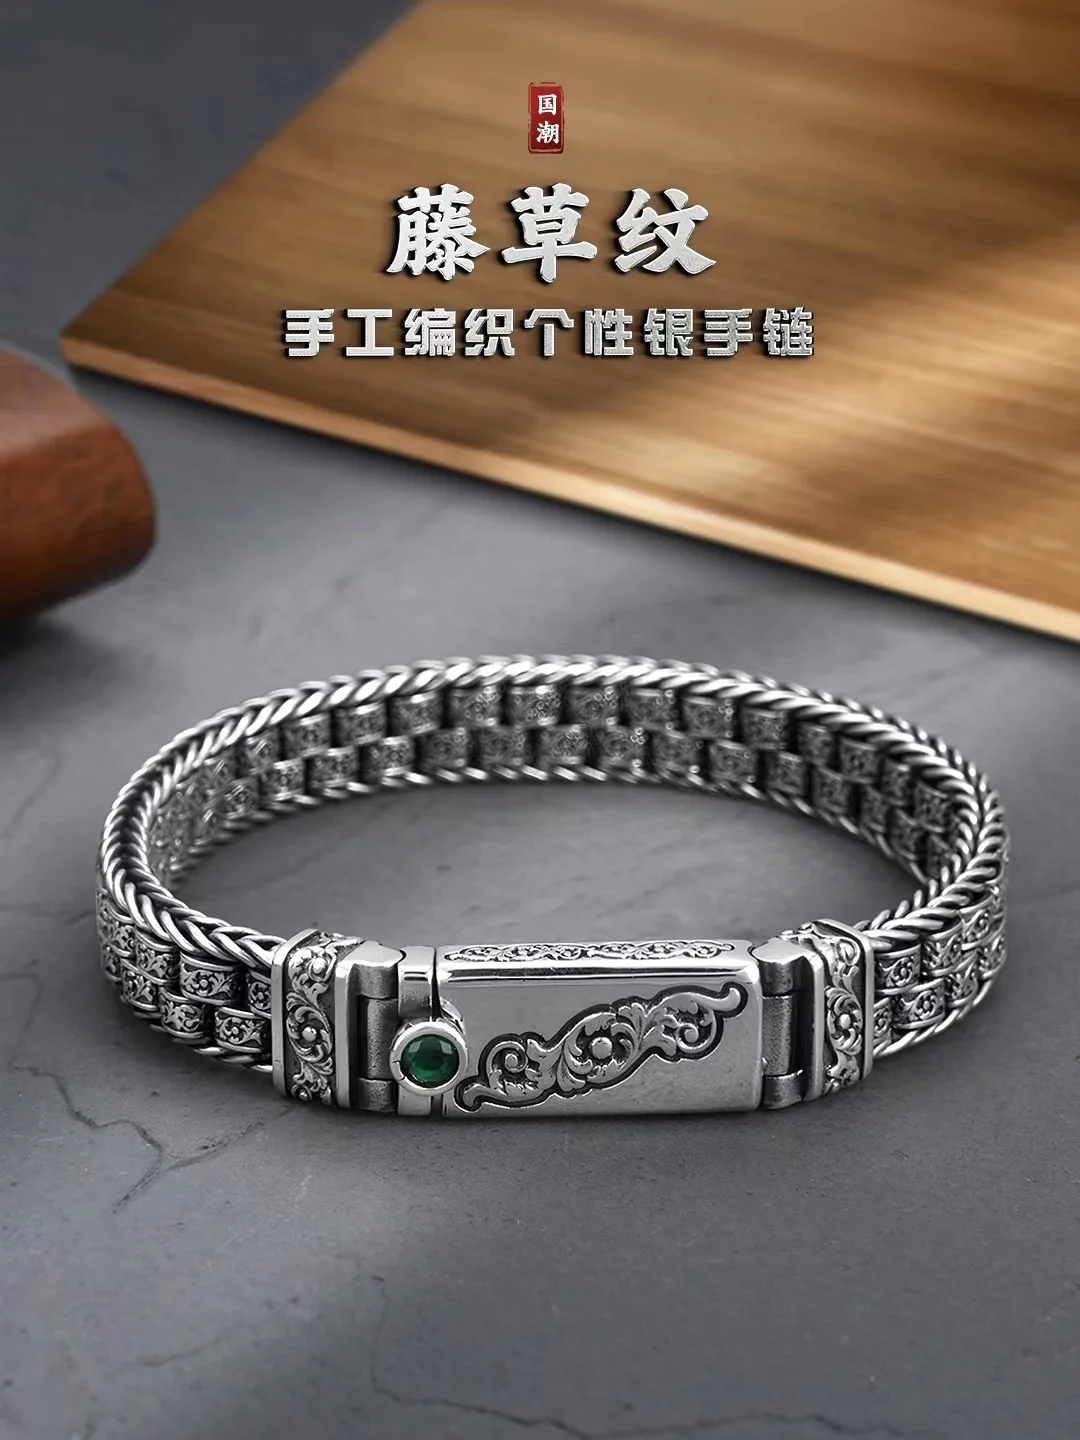 

New Rattan Grass Pattern Woven Bracelet for Boys, Personalized Women, China-Chic, Retro National Style